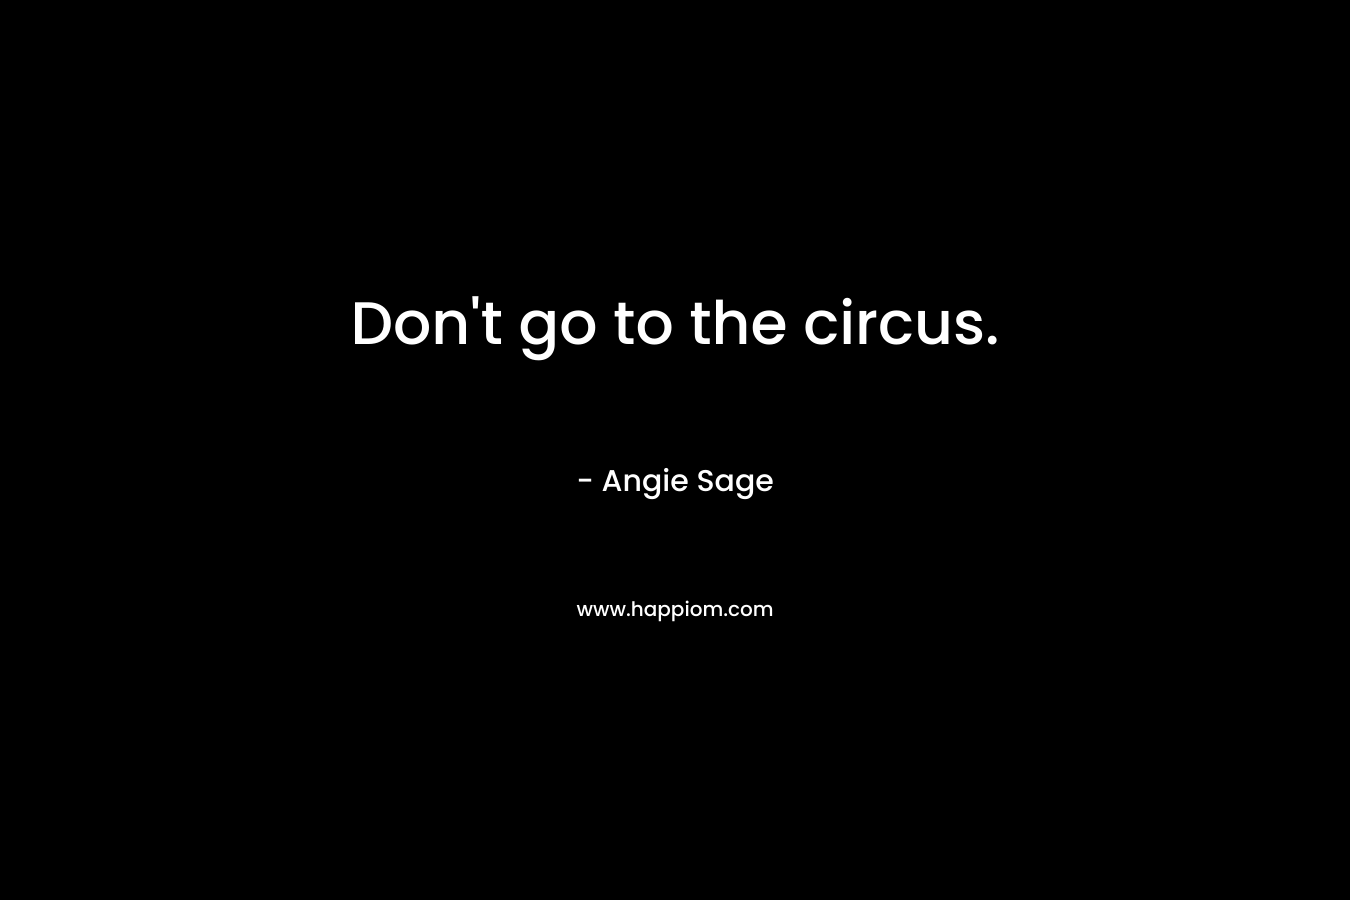 Don’t go to the circus. – Angie Sage